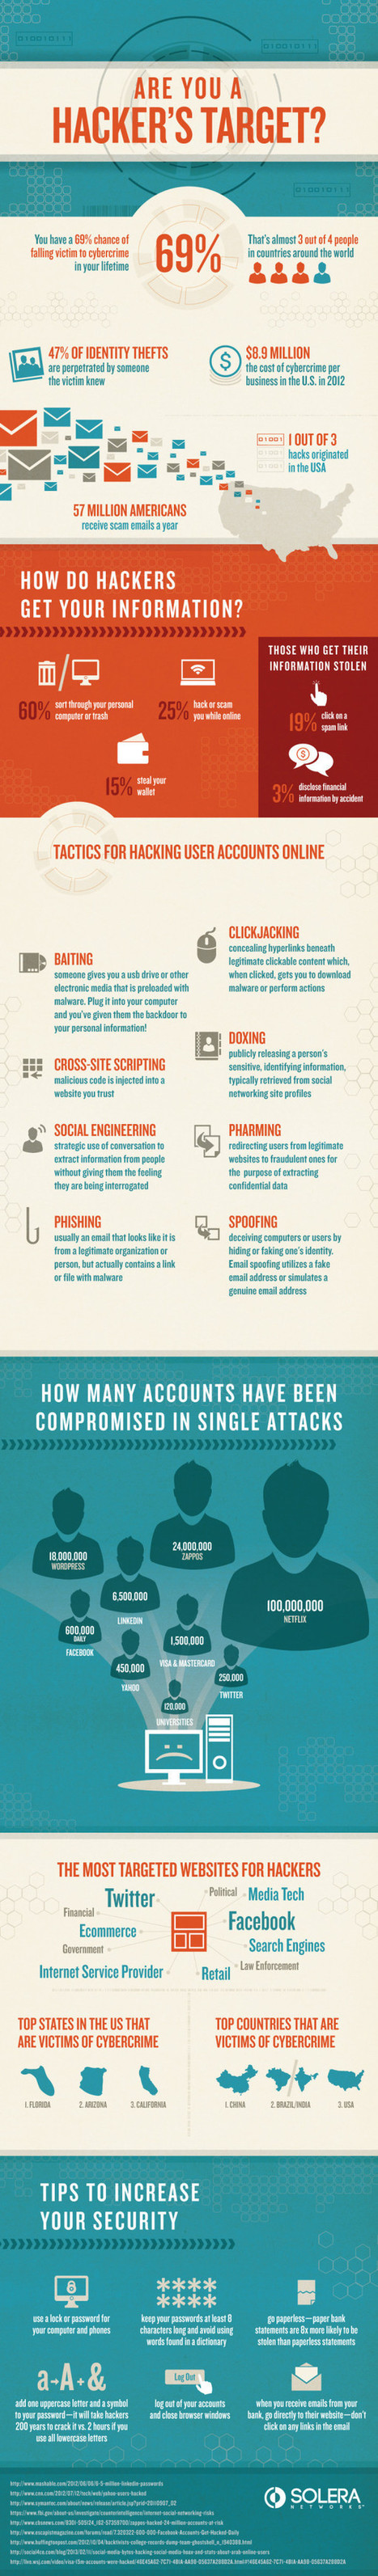 Are you a hacker's target? [infographic] | Latest Social Media News | Scoop.it